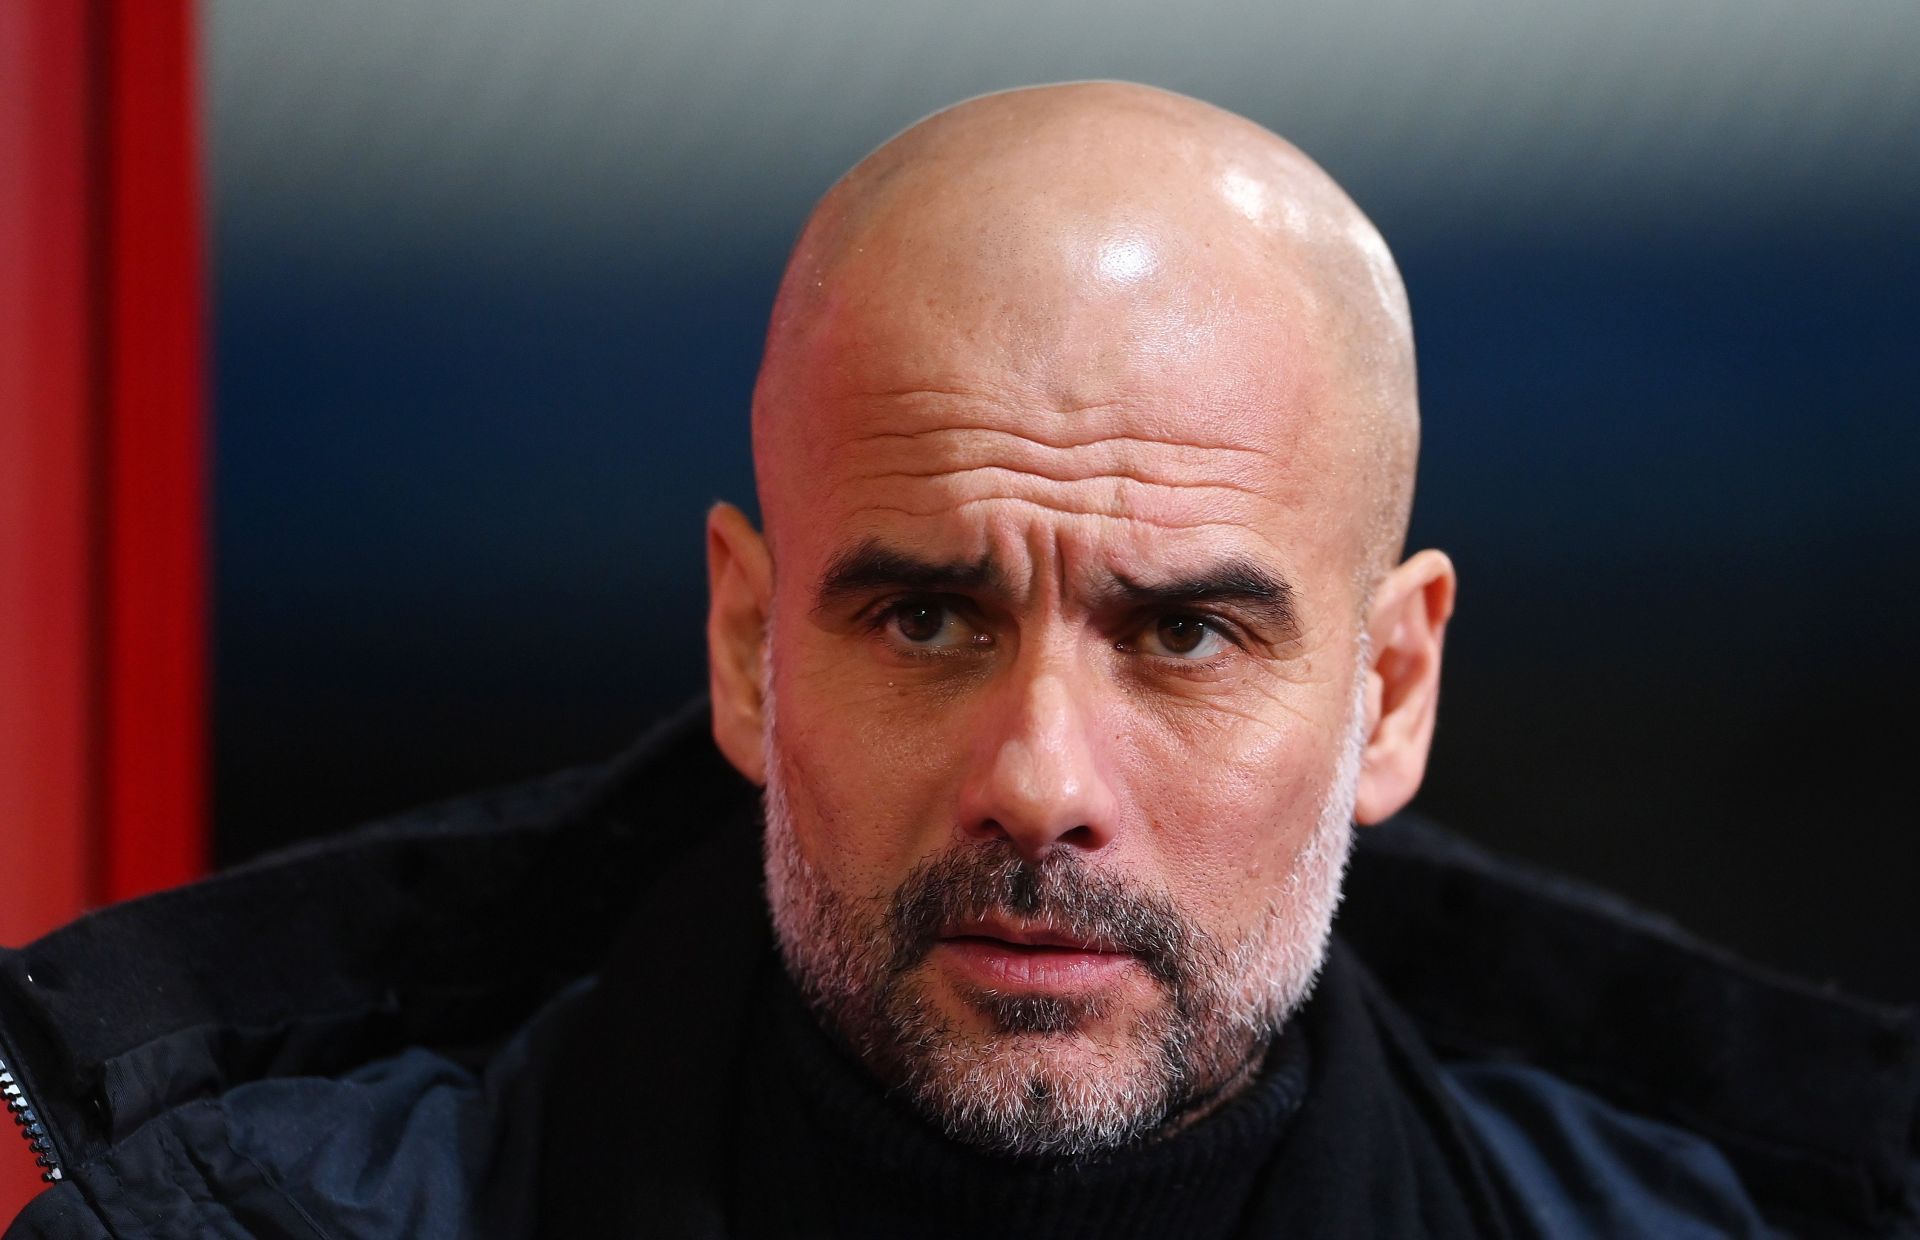 Pep Guardiola will be hoping that Liverpool loses to Arsenal on Wednesday